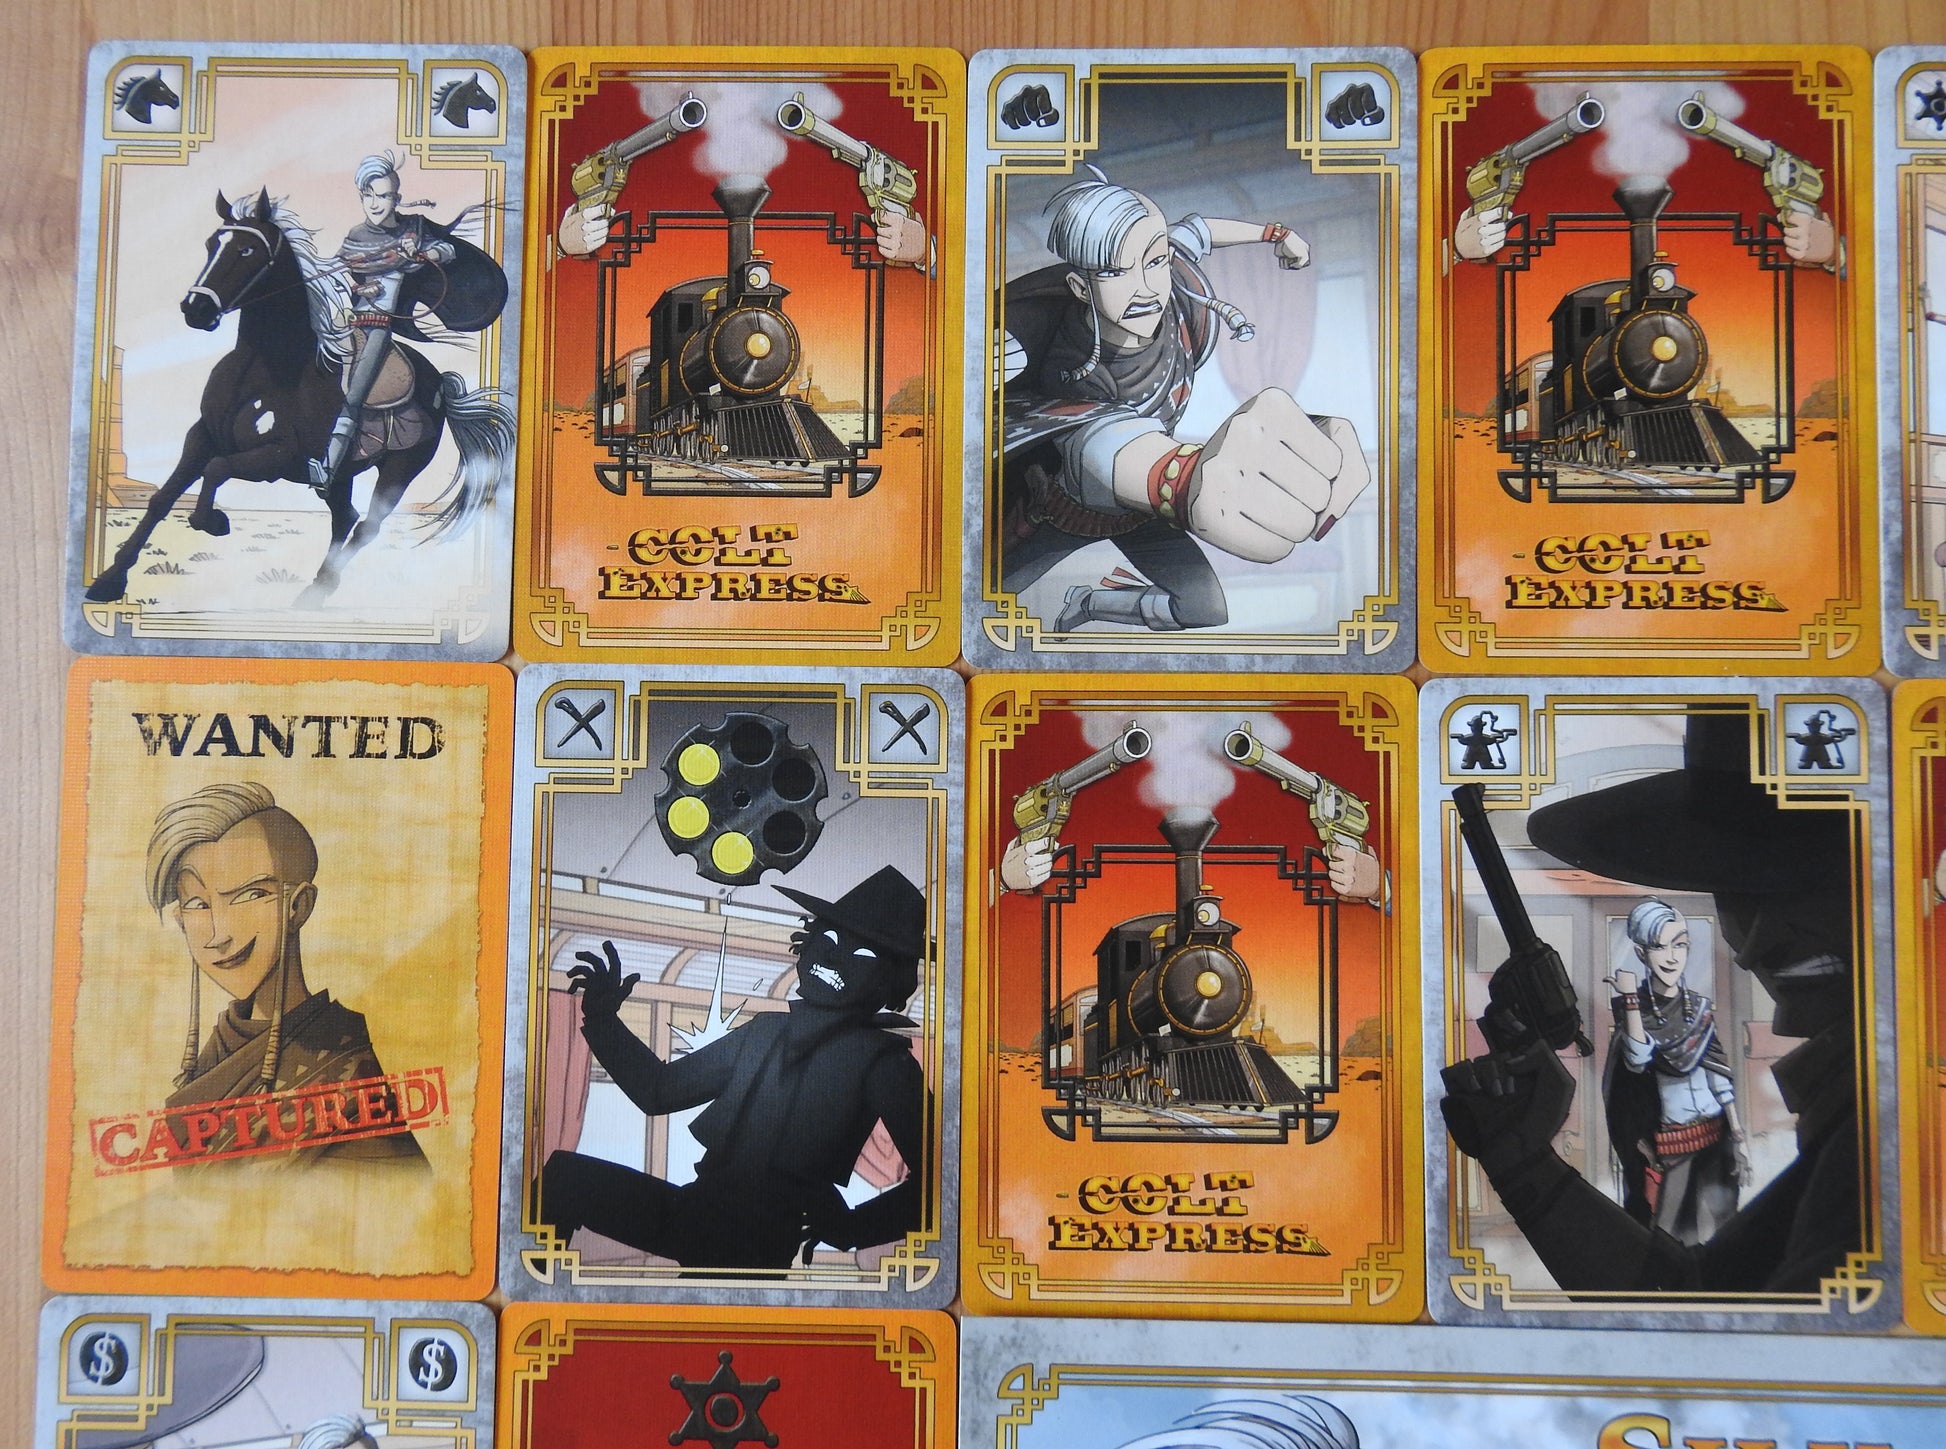 A further view of more of the cards that come with the Colt Express Silk Bandit mini expansion.